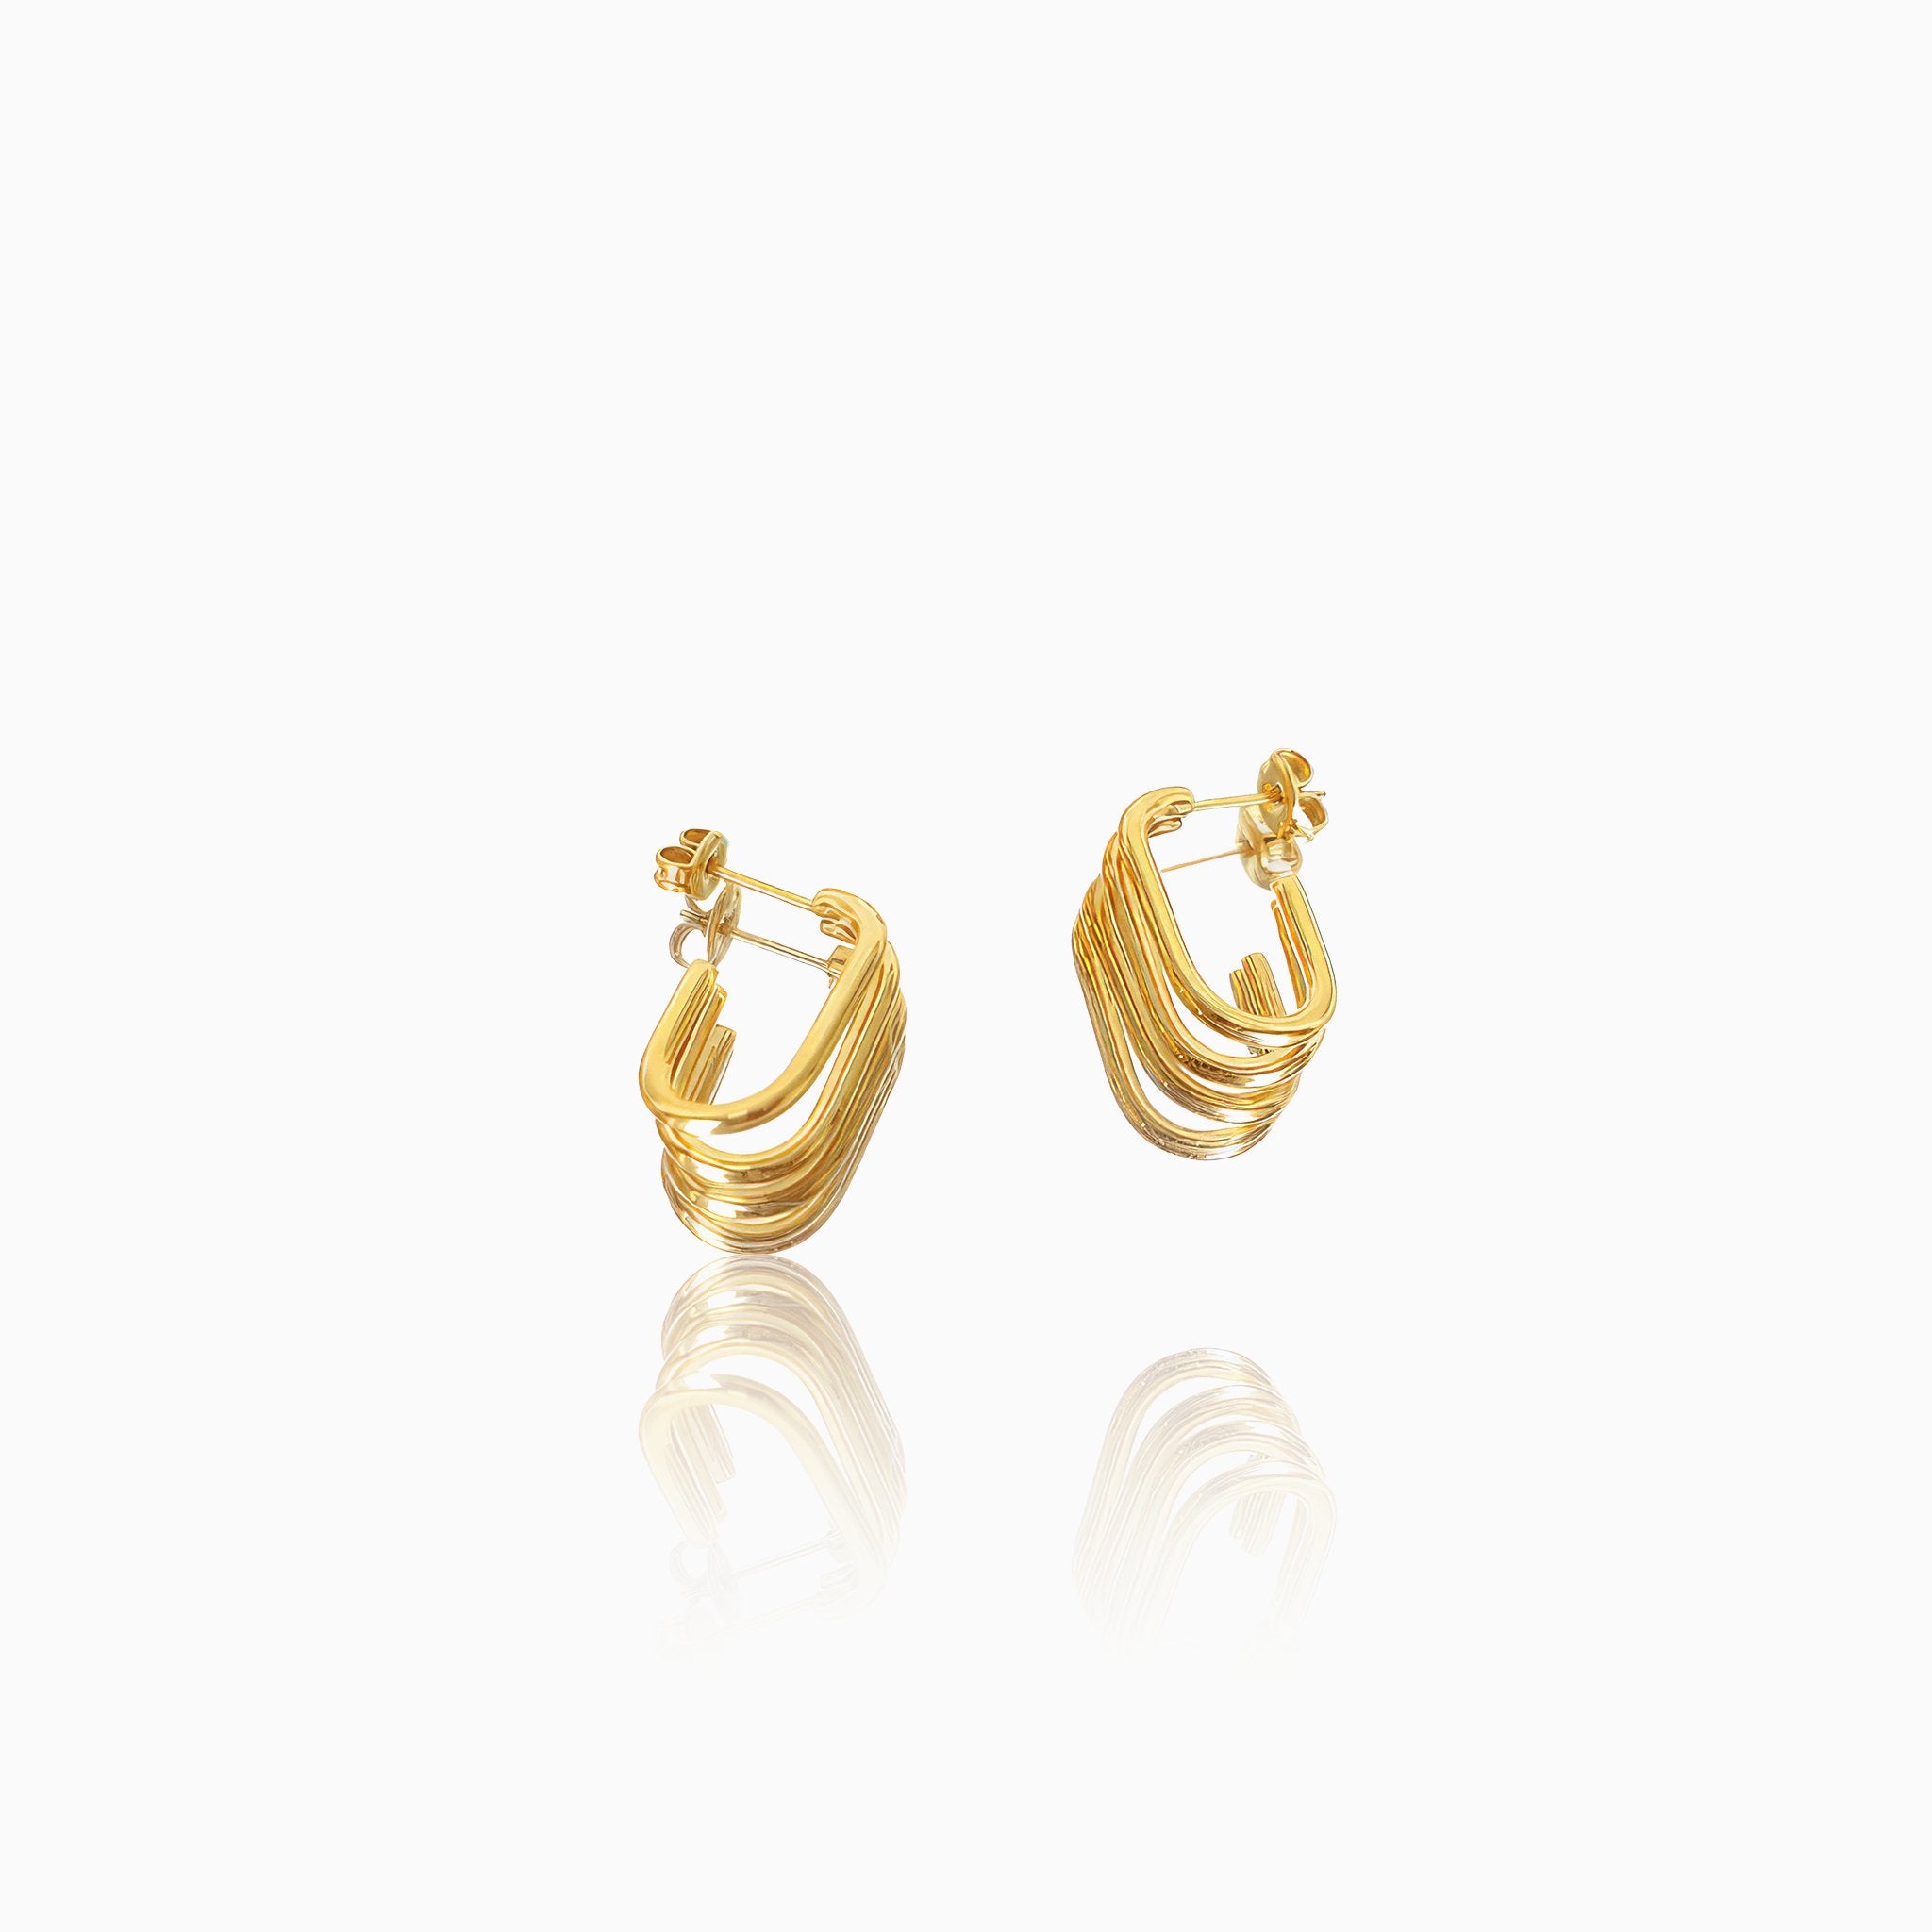 Exquisite Simple Oval Versatile Earrings - Nobbier - Earrings - 18K Gold And Titanium PVD Coated Jewelry